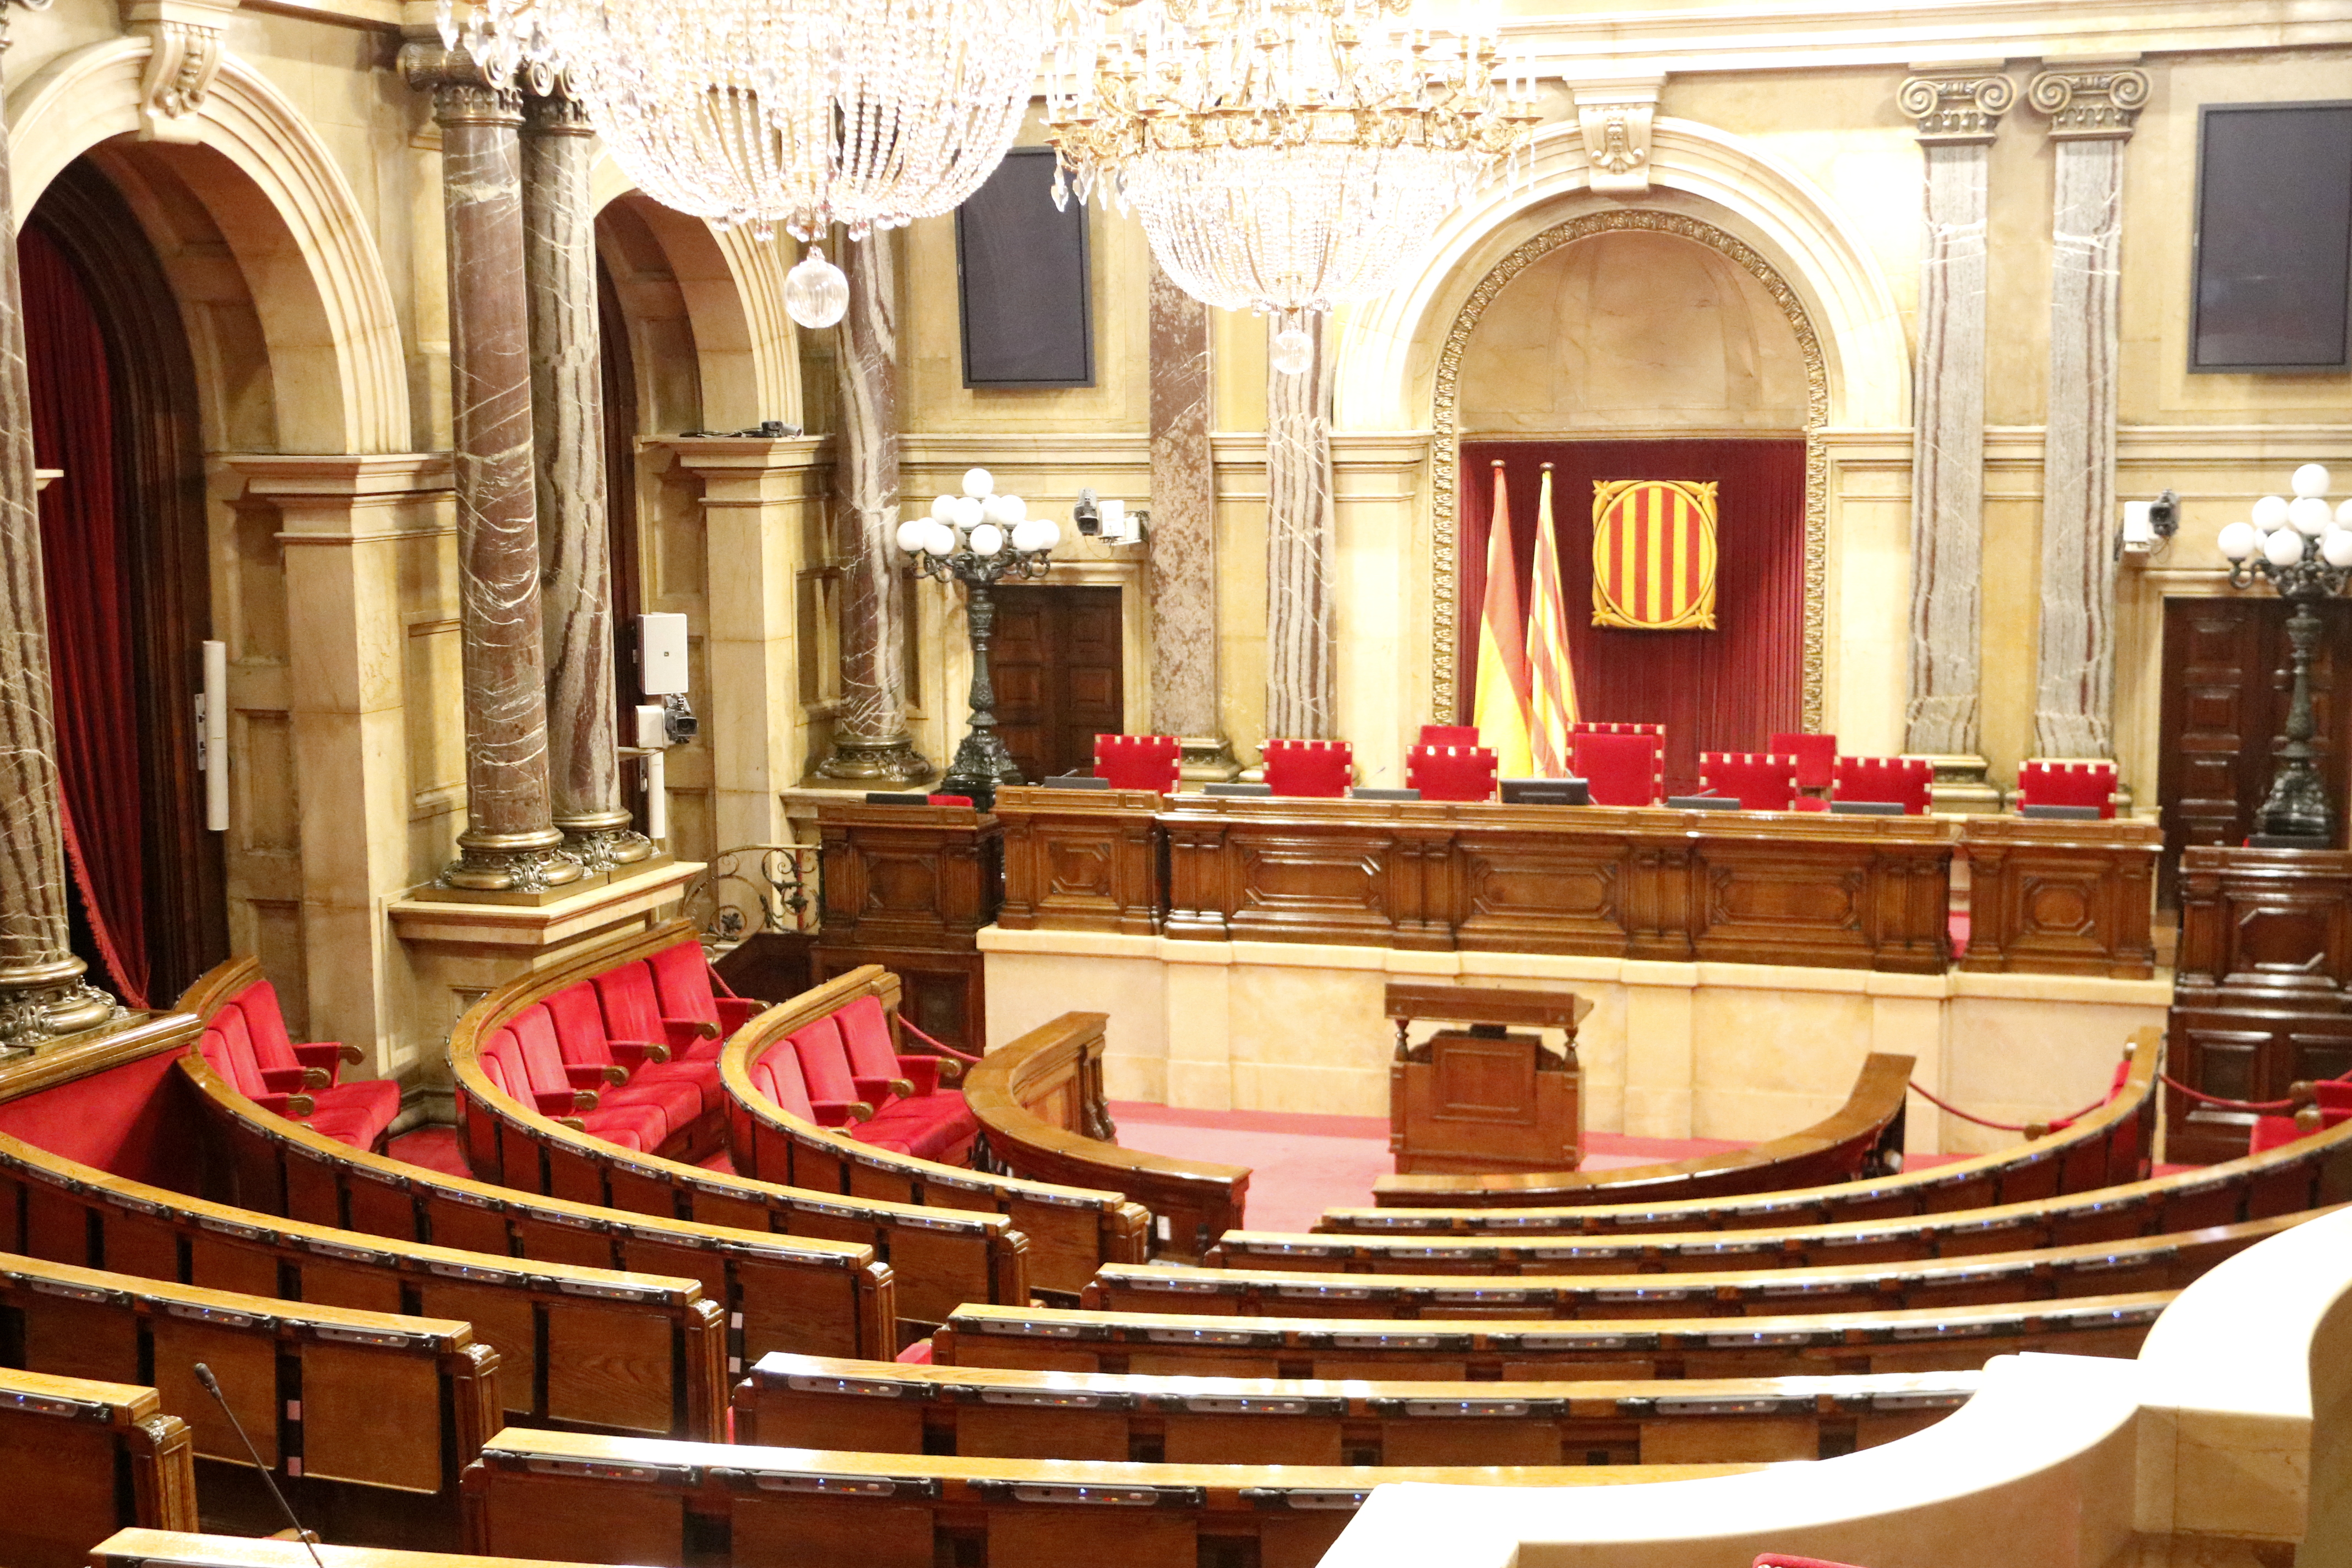 An image of the Catalan Parliament empty